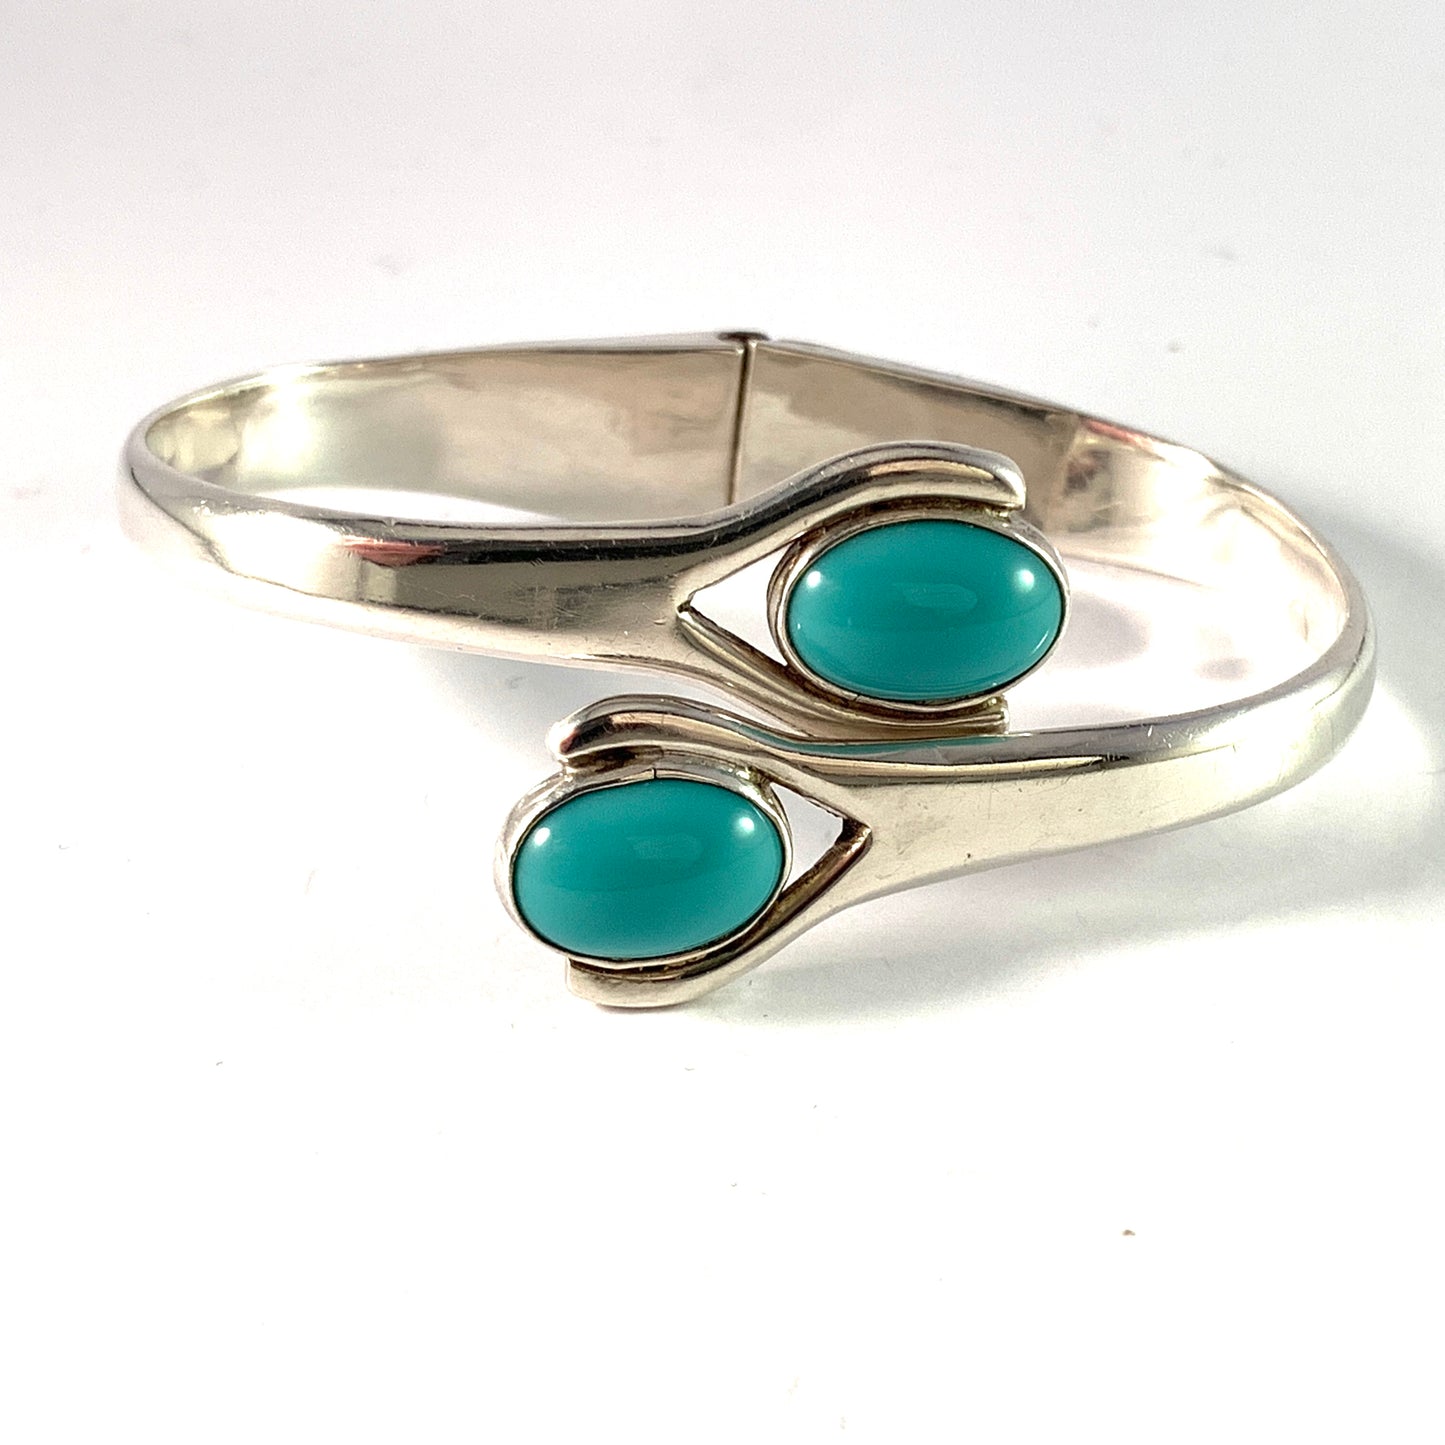 Taxco, Mexico. Vintage 1960s Sterling Silver Turquoise Clamper Spring Cuff Bracelet.